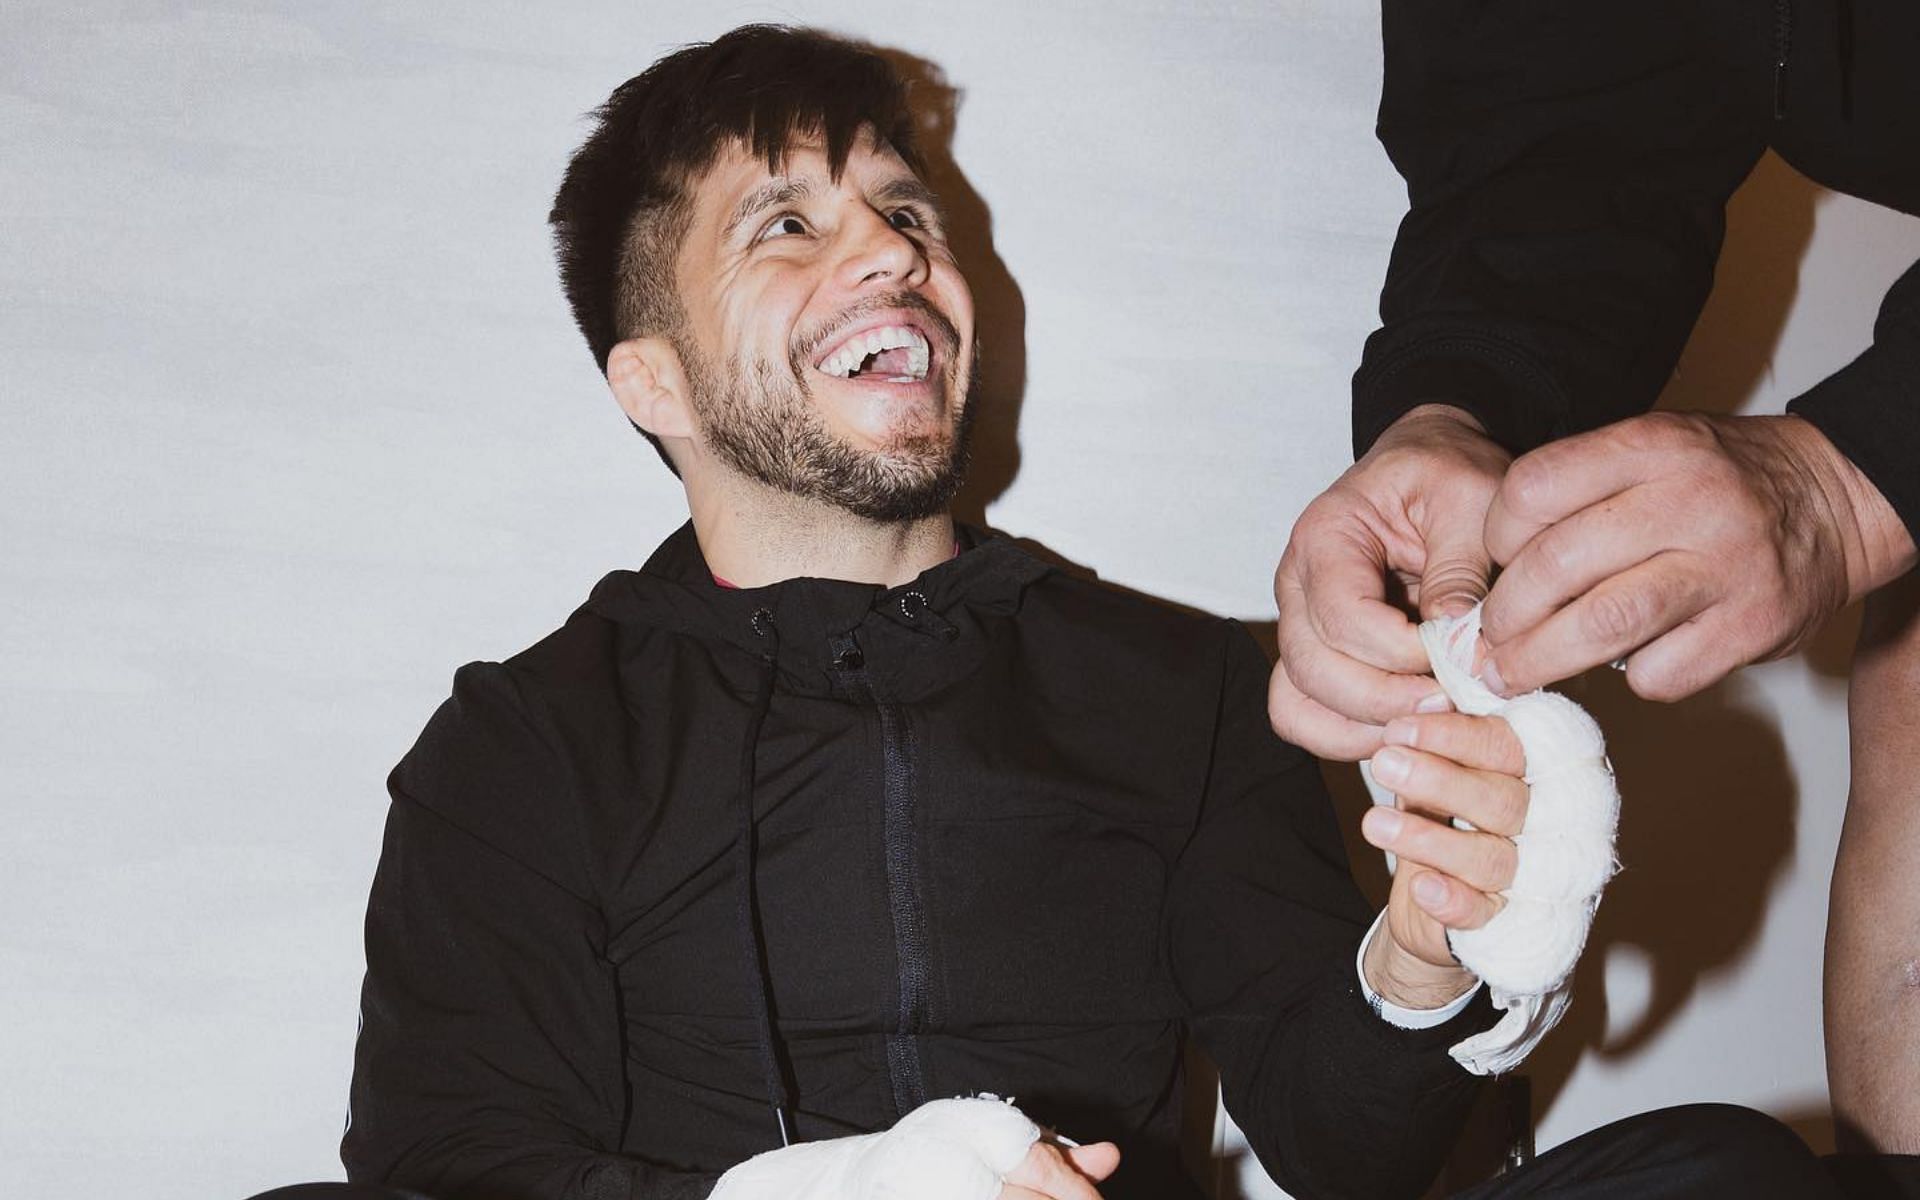 Did Henry Cejudo waste some of his prime years in his self-imposed retirement?